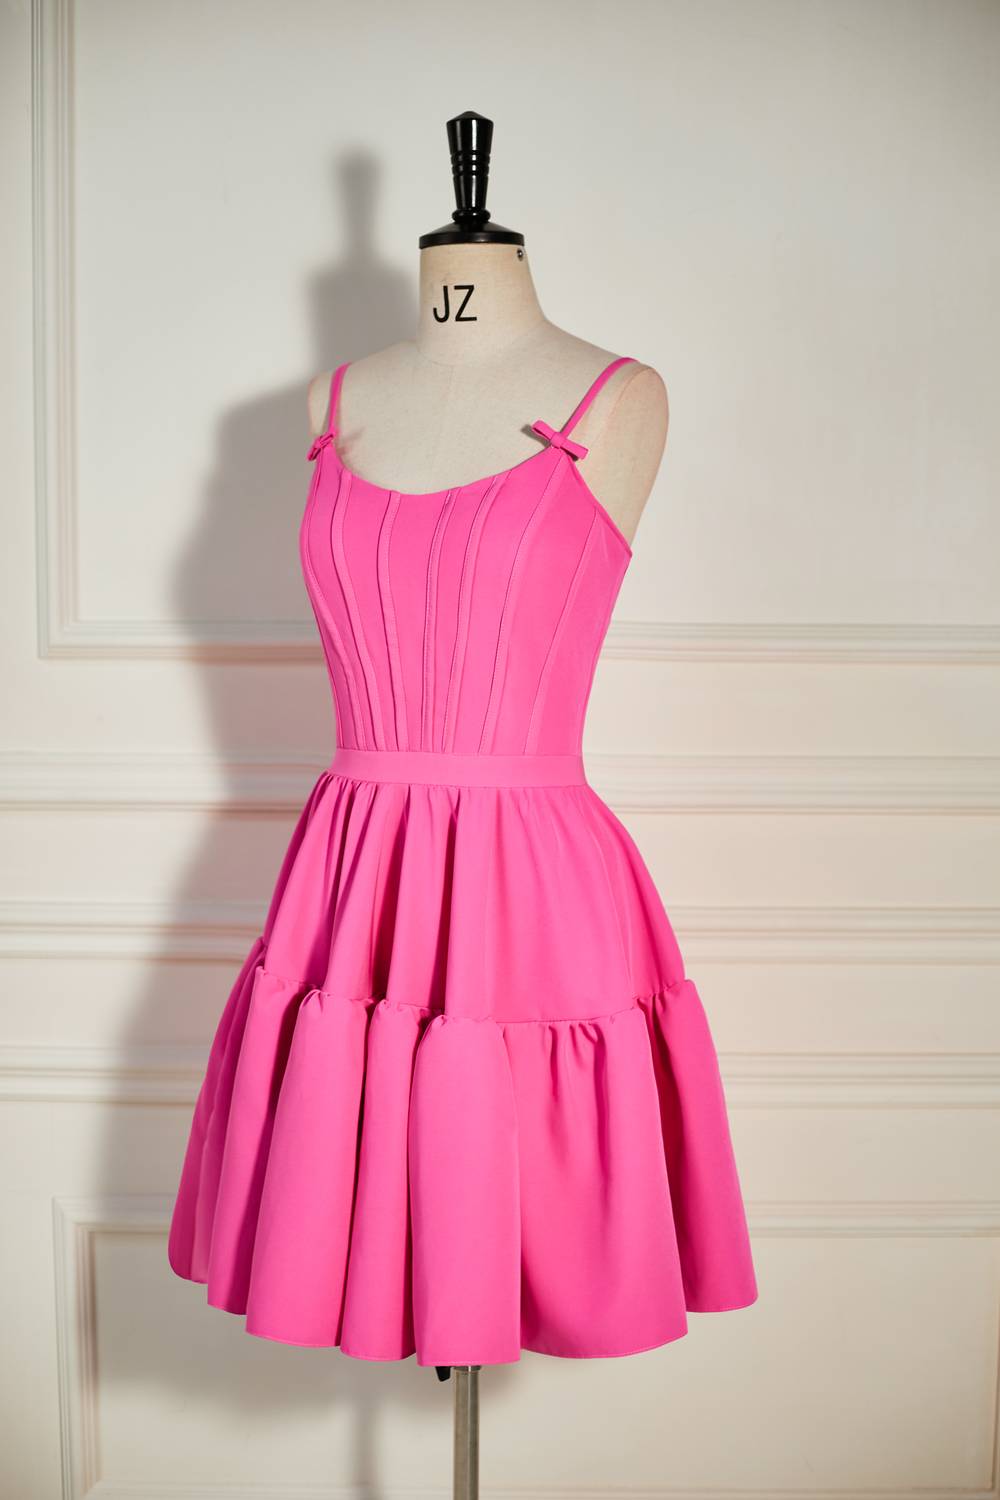 Formal Dresses Winter, Hot Pink A-line Ruffled Lace-Up Homecoming Dress